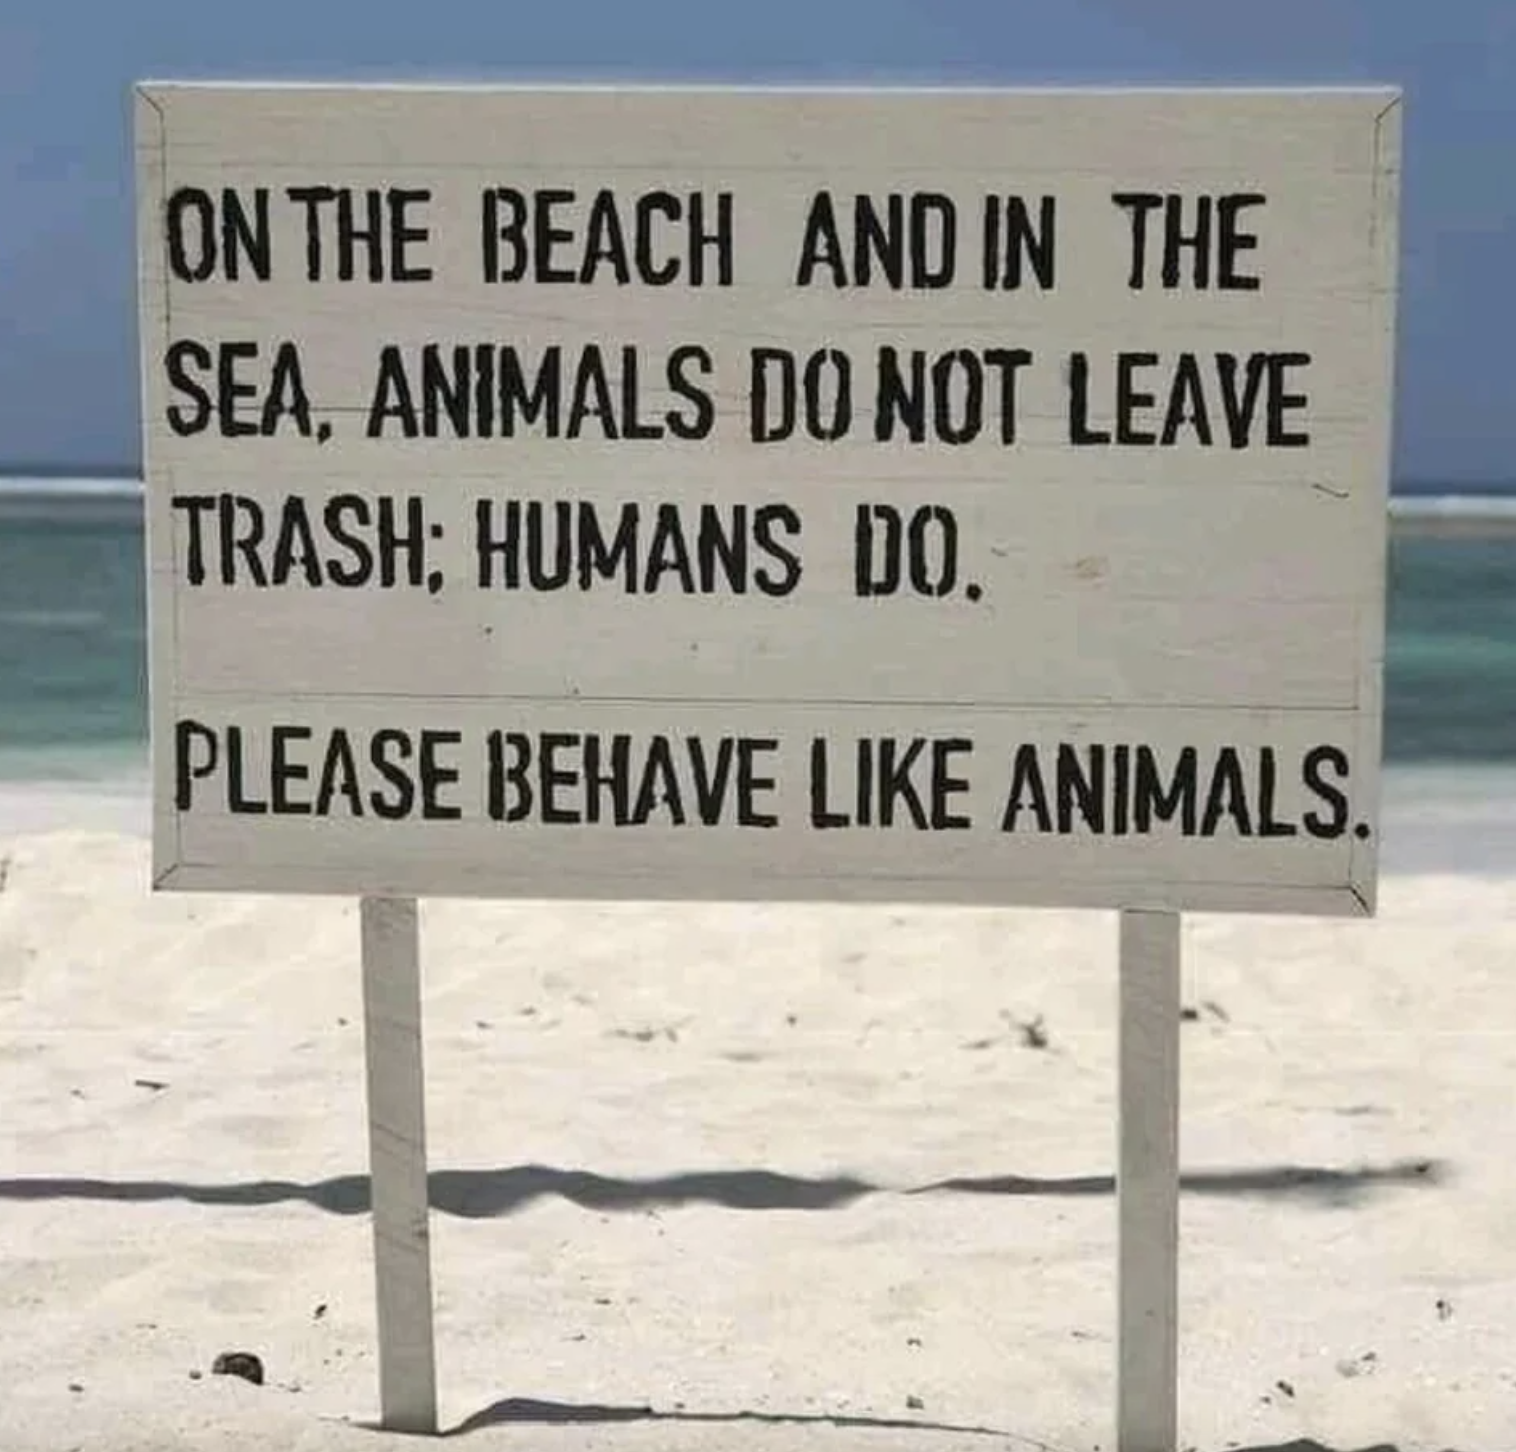 Beach sign in the sand: &quot;On the beach and in the sea, animals do not leave trash; humans do / Please behave like animals&quot;